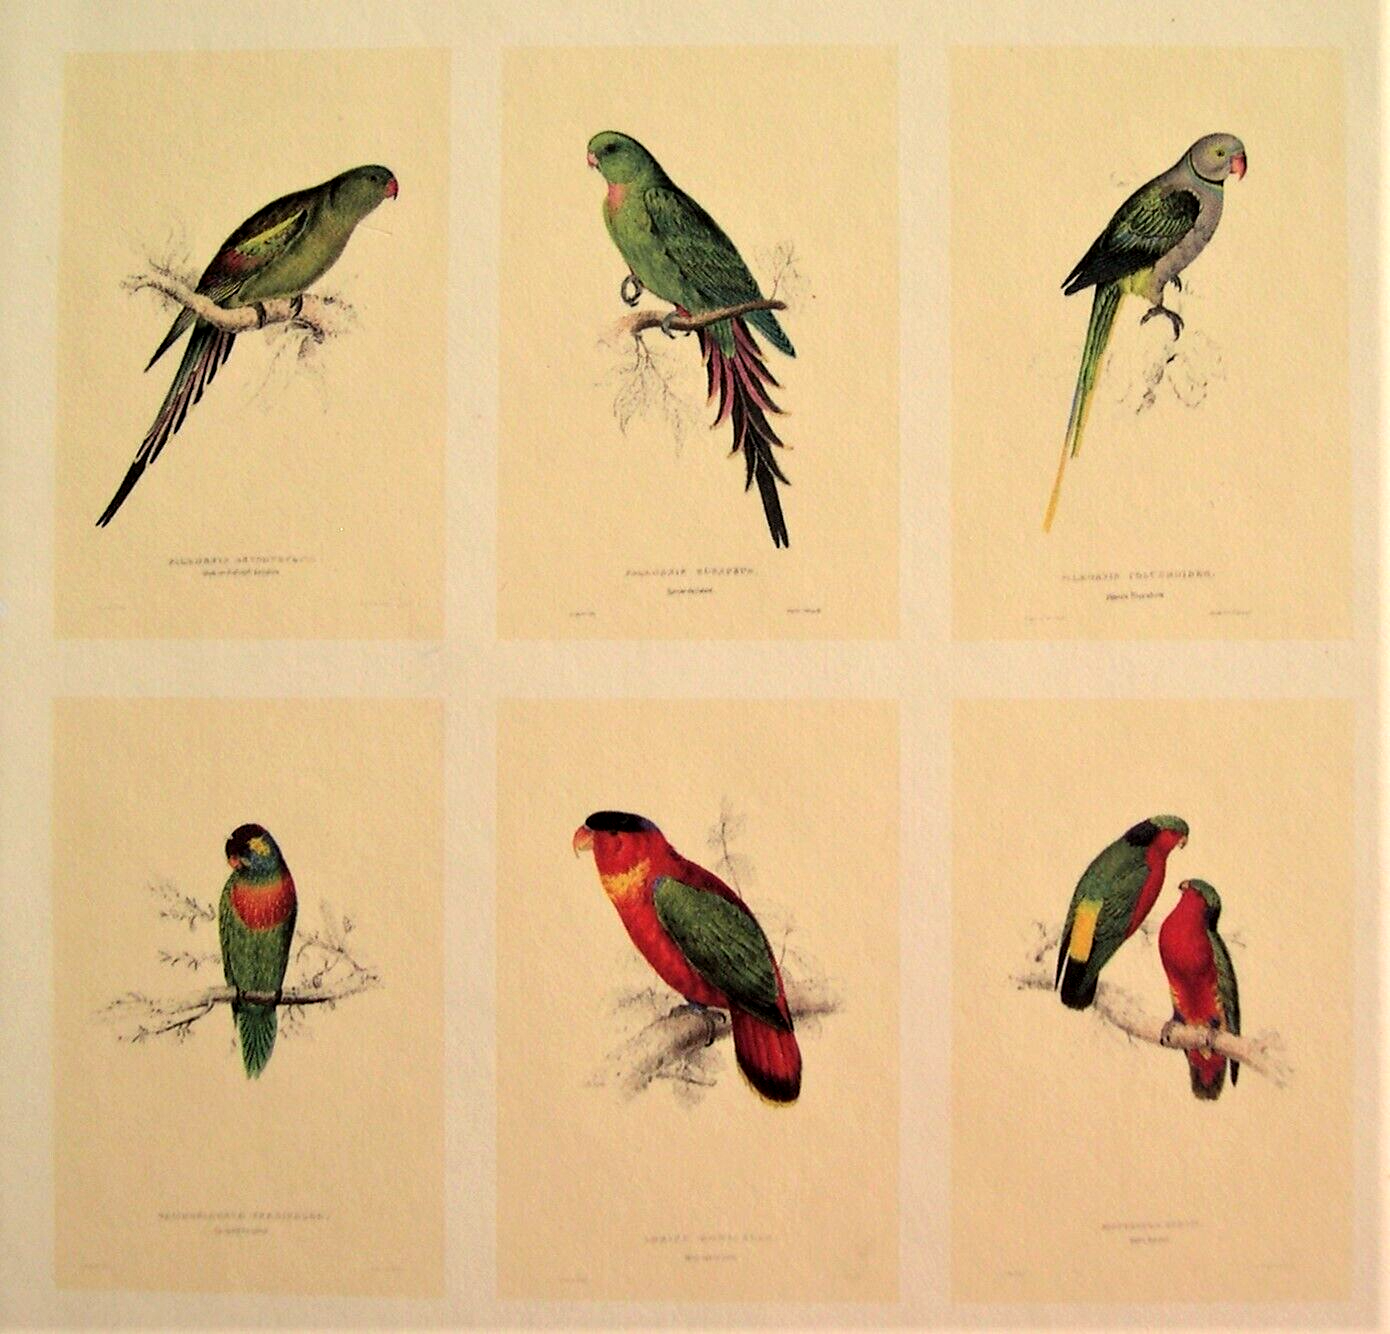 42 Lear Parrot Prints; The Complete Set Directly From His Original 1832 Folio Без бренда - фотография #5